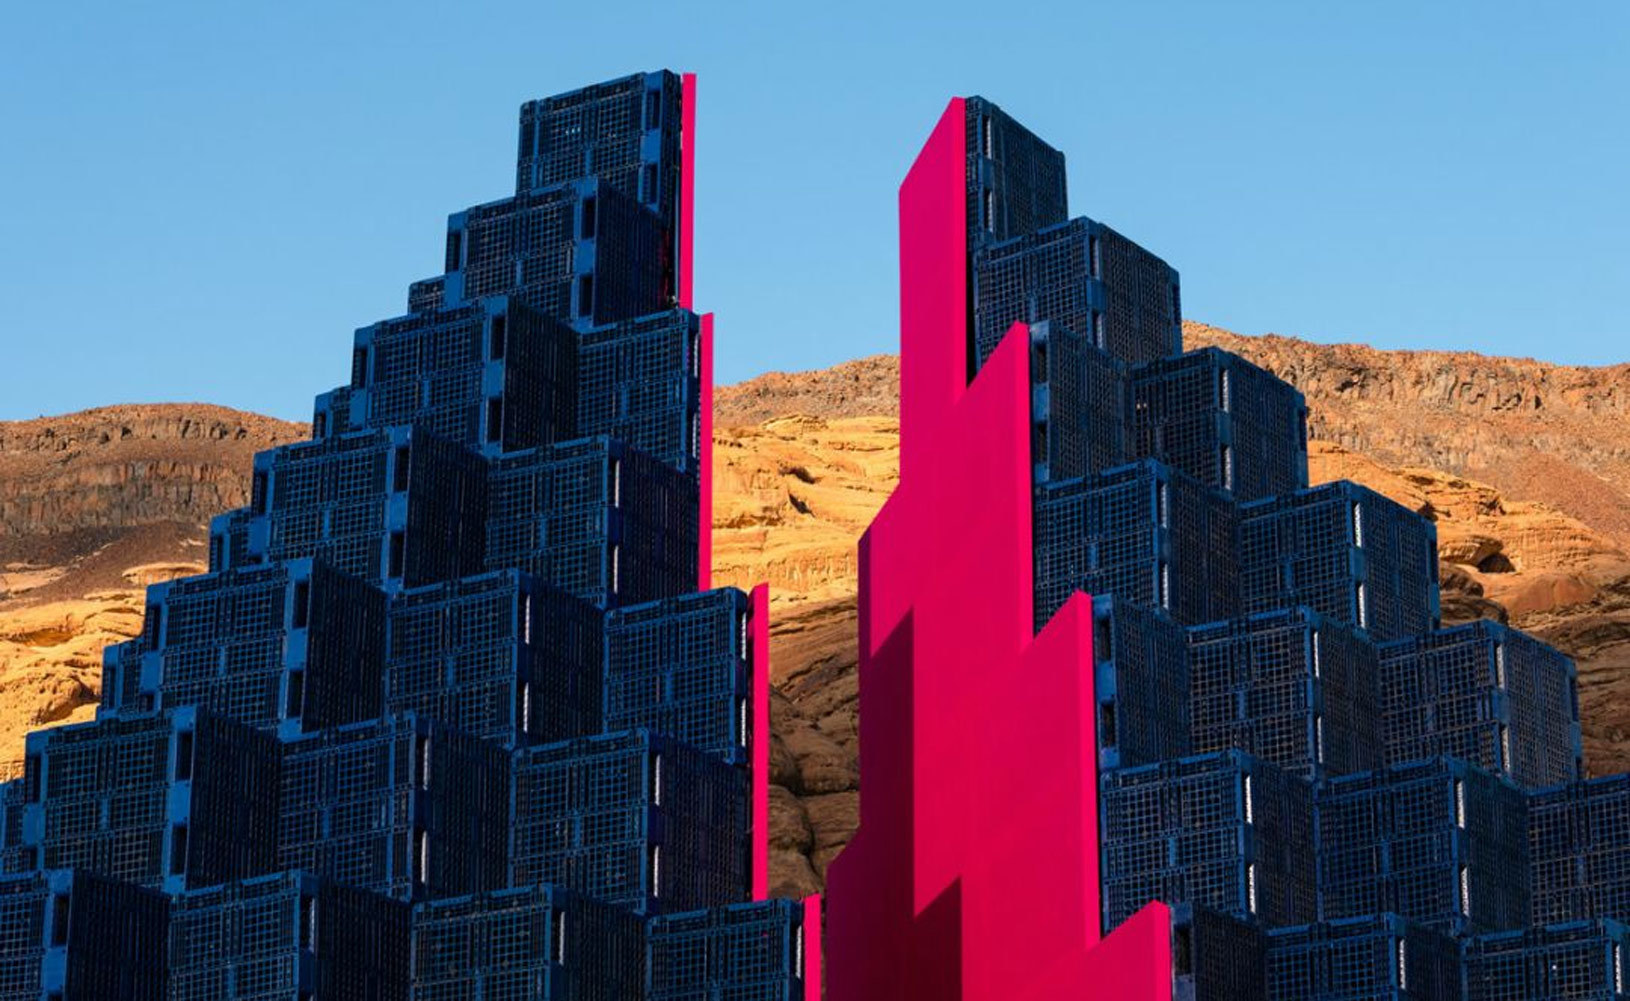 An art exhibition held in the desert, and a barren land becomes a clocking landmark every second